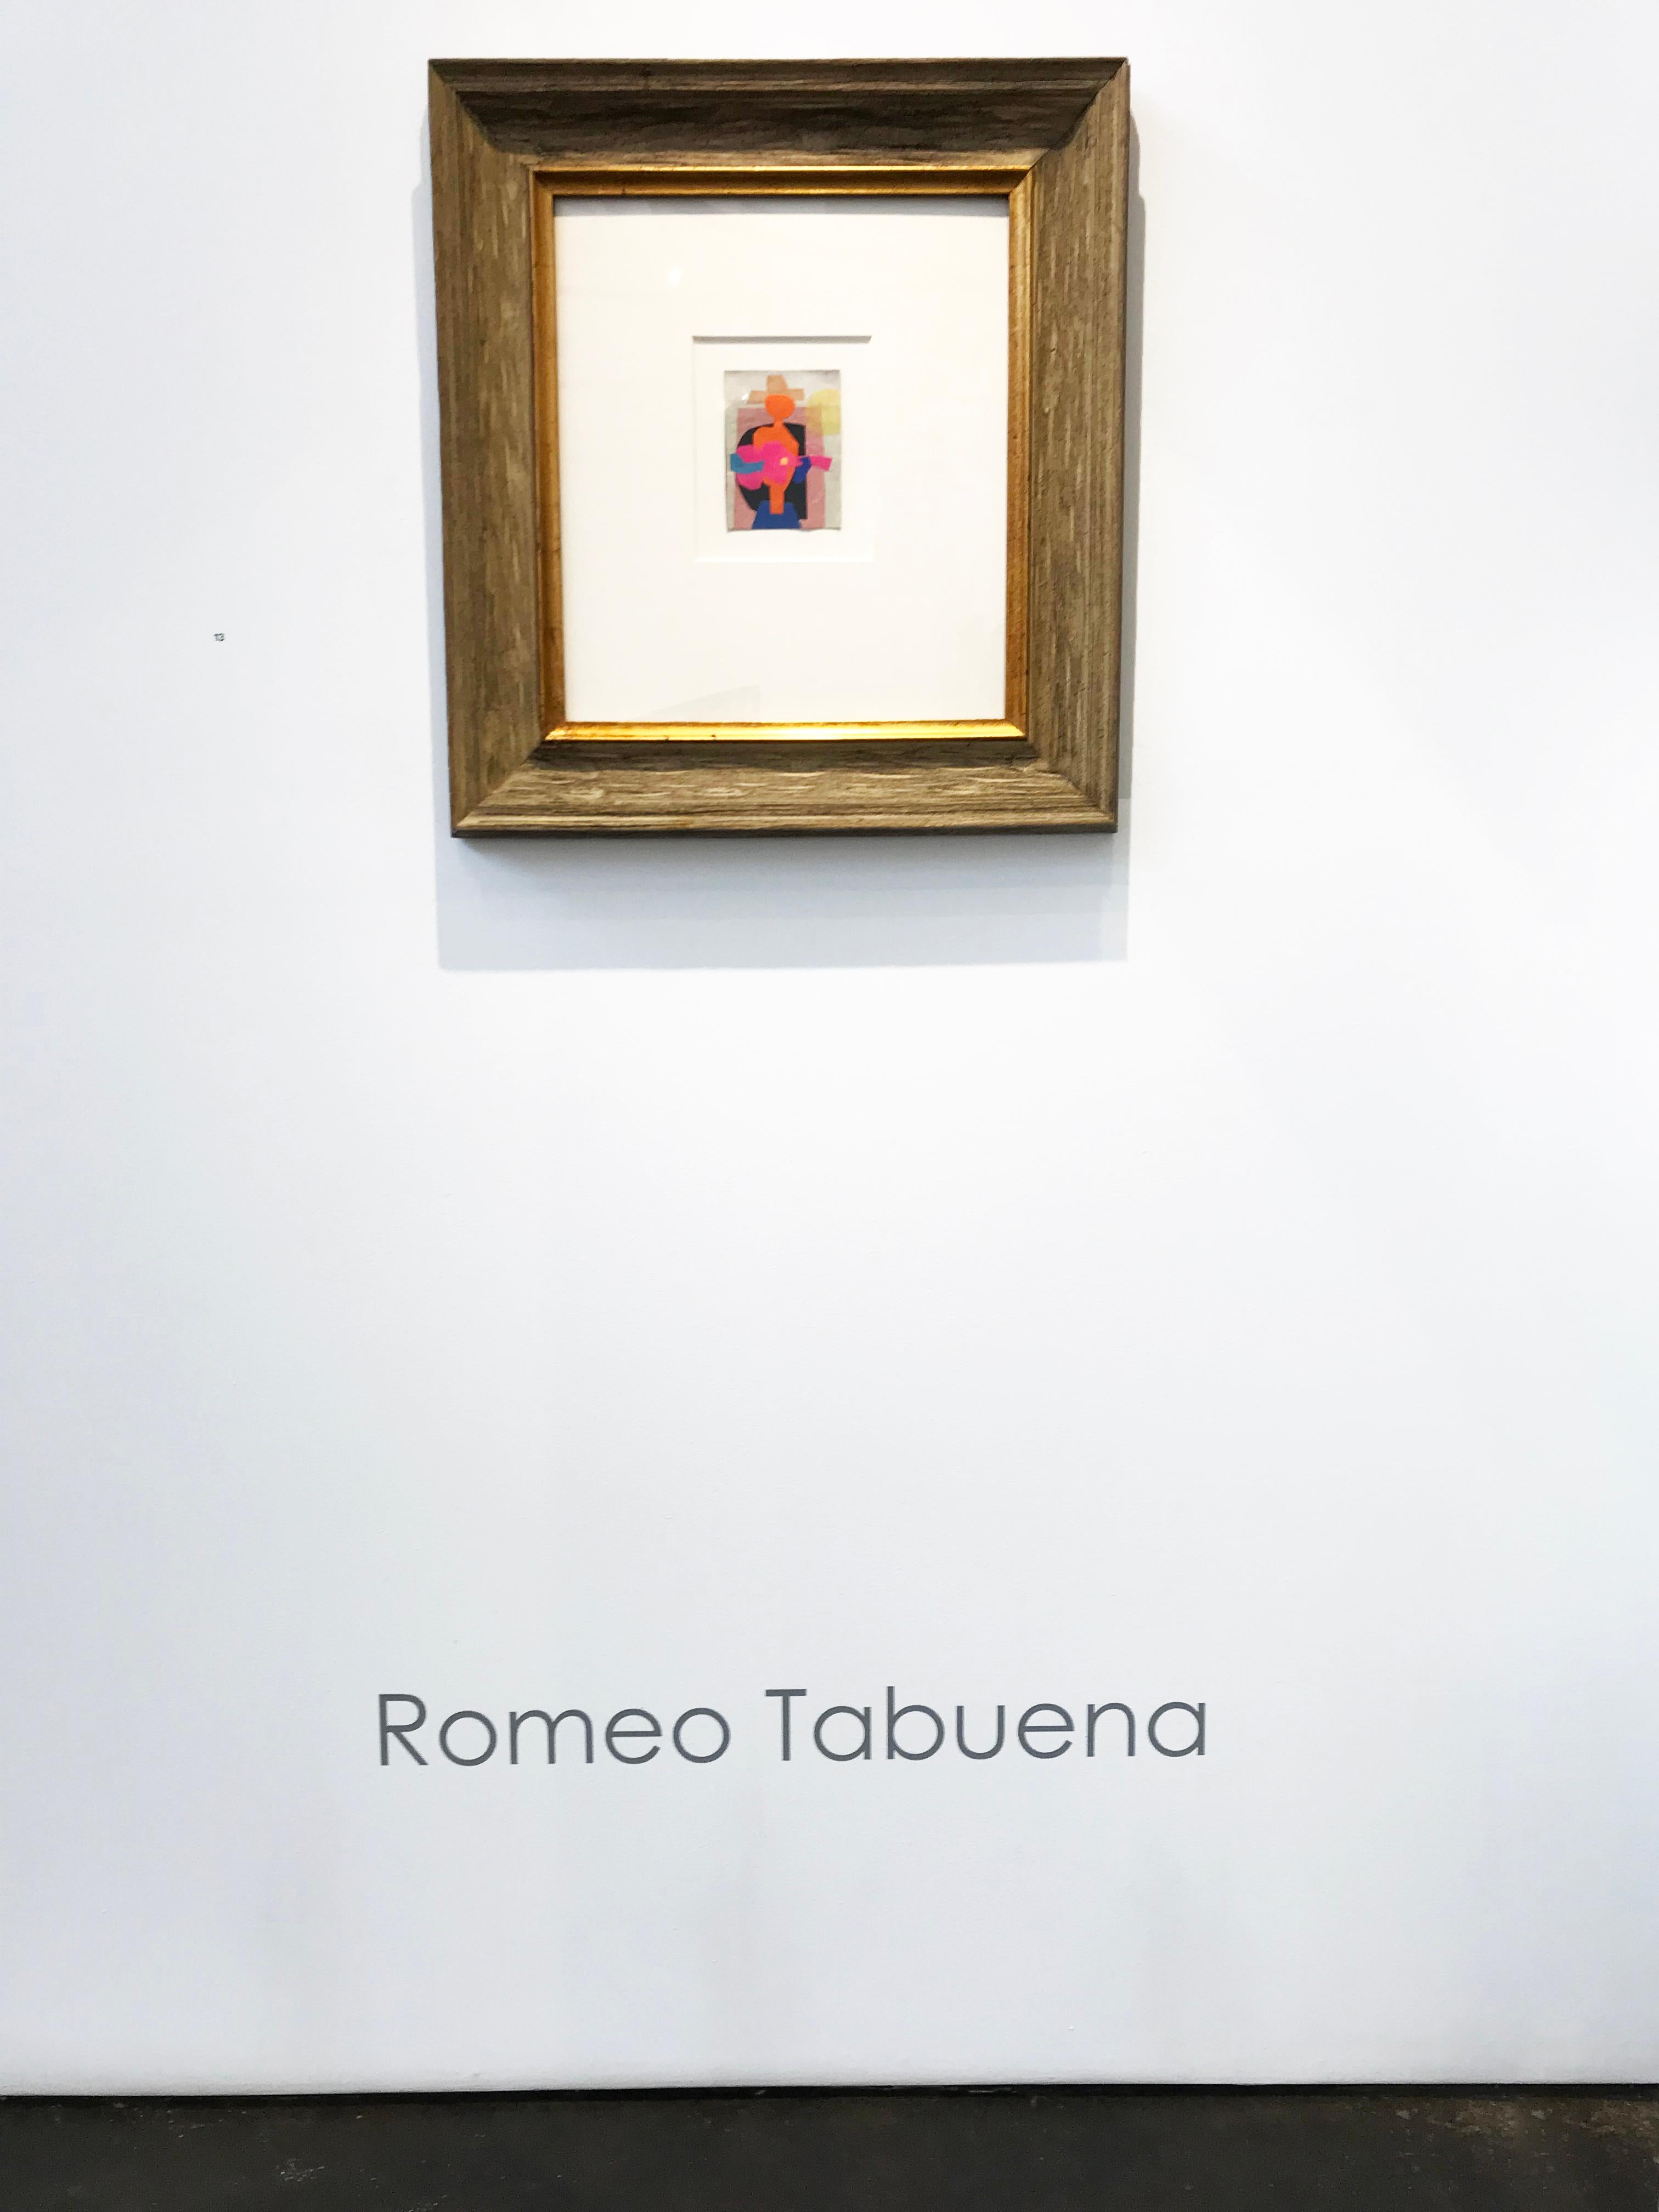 Multi-color collage
From the Estate of Romeo Tabuena
Vintage frame dimensions: 24.5